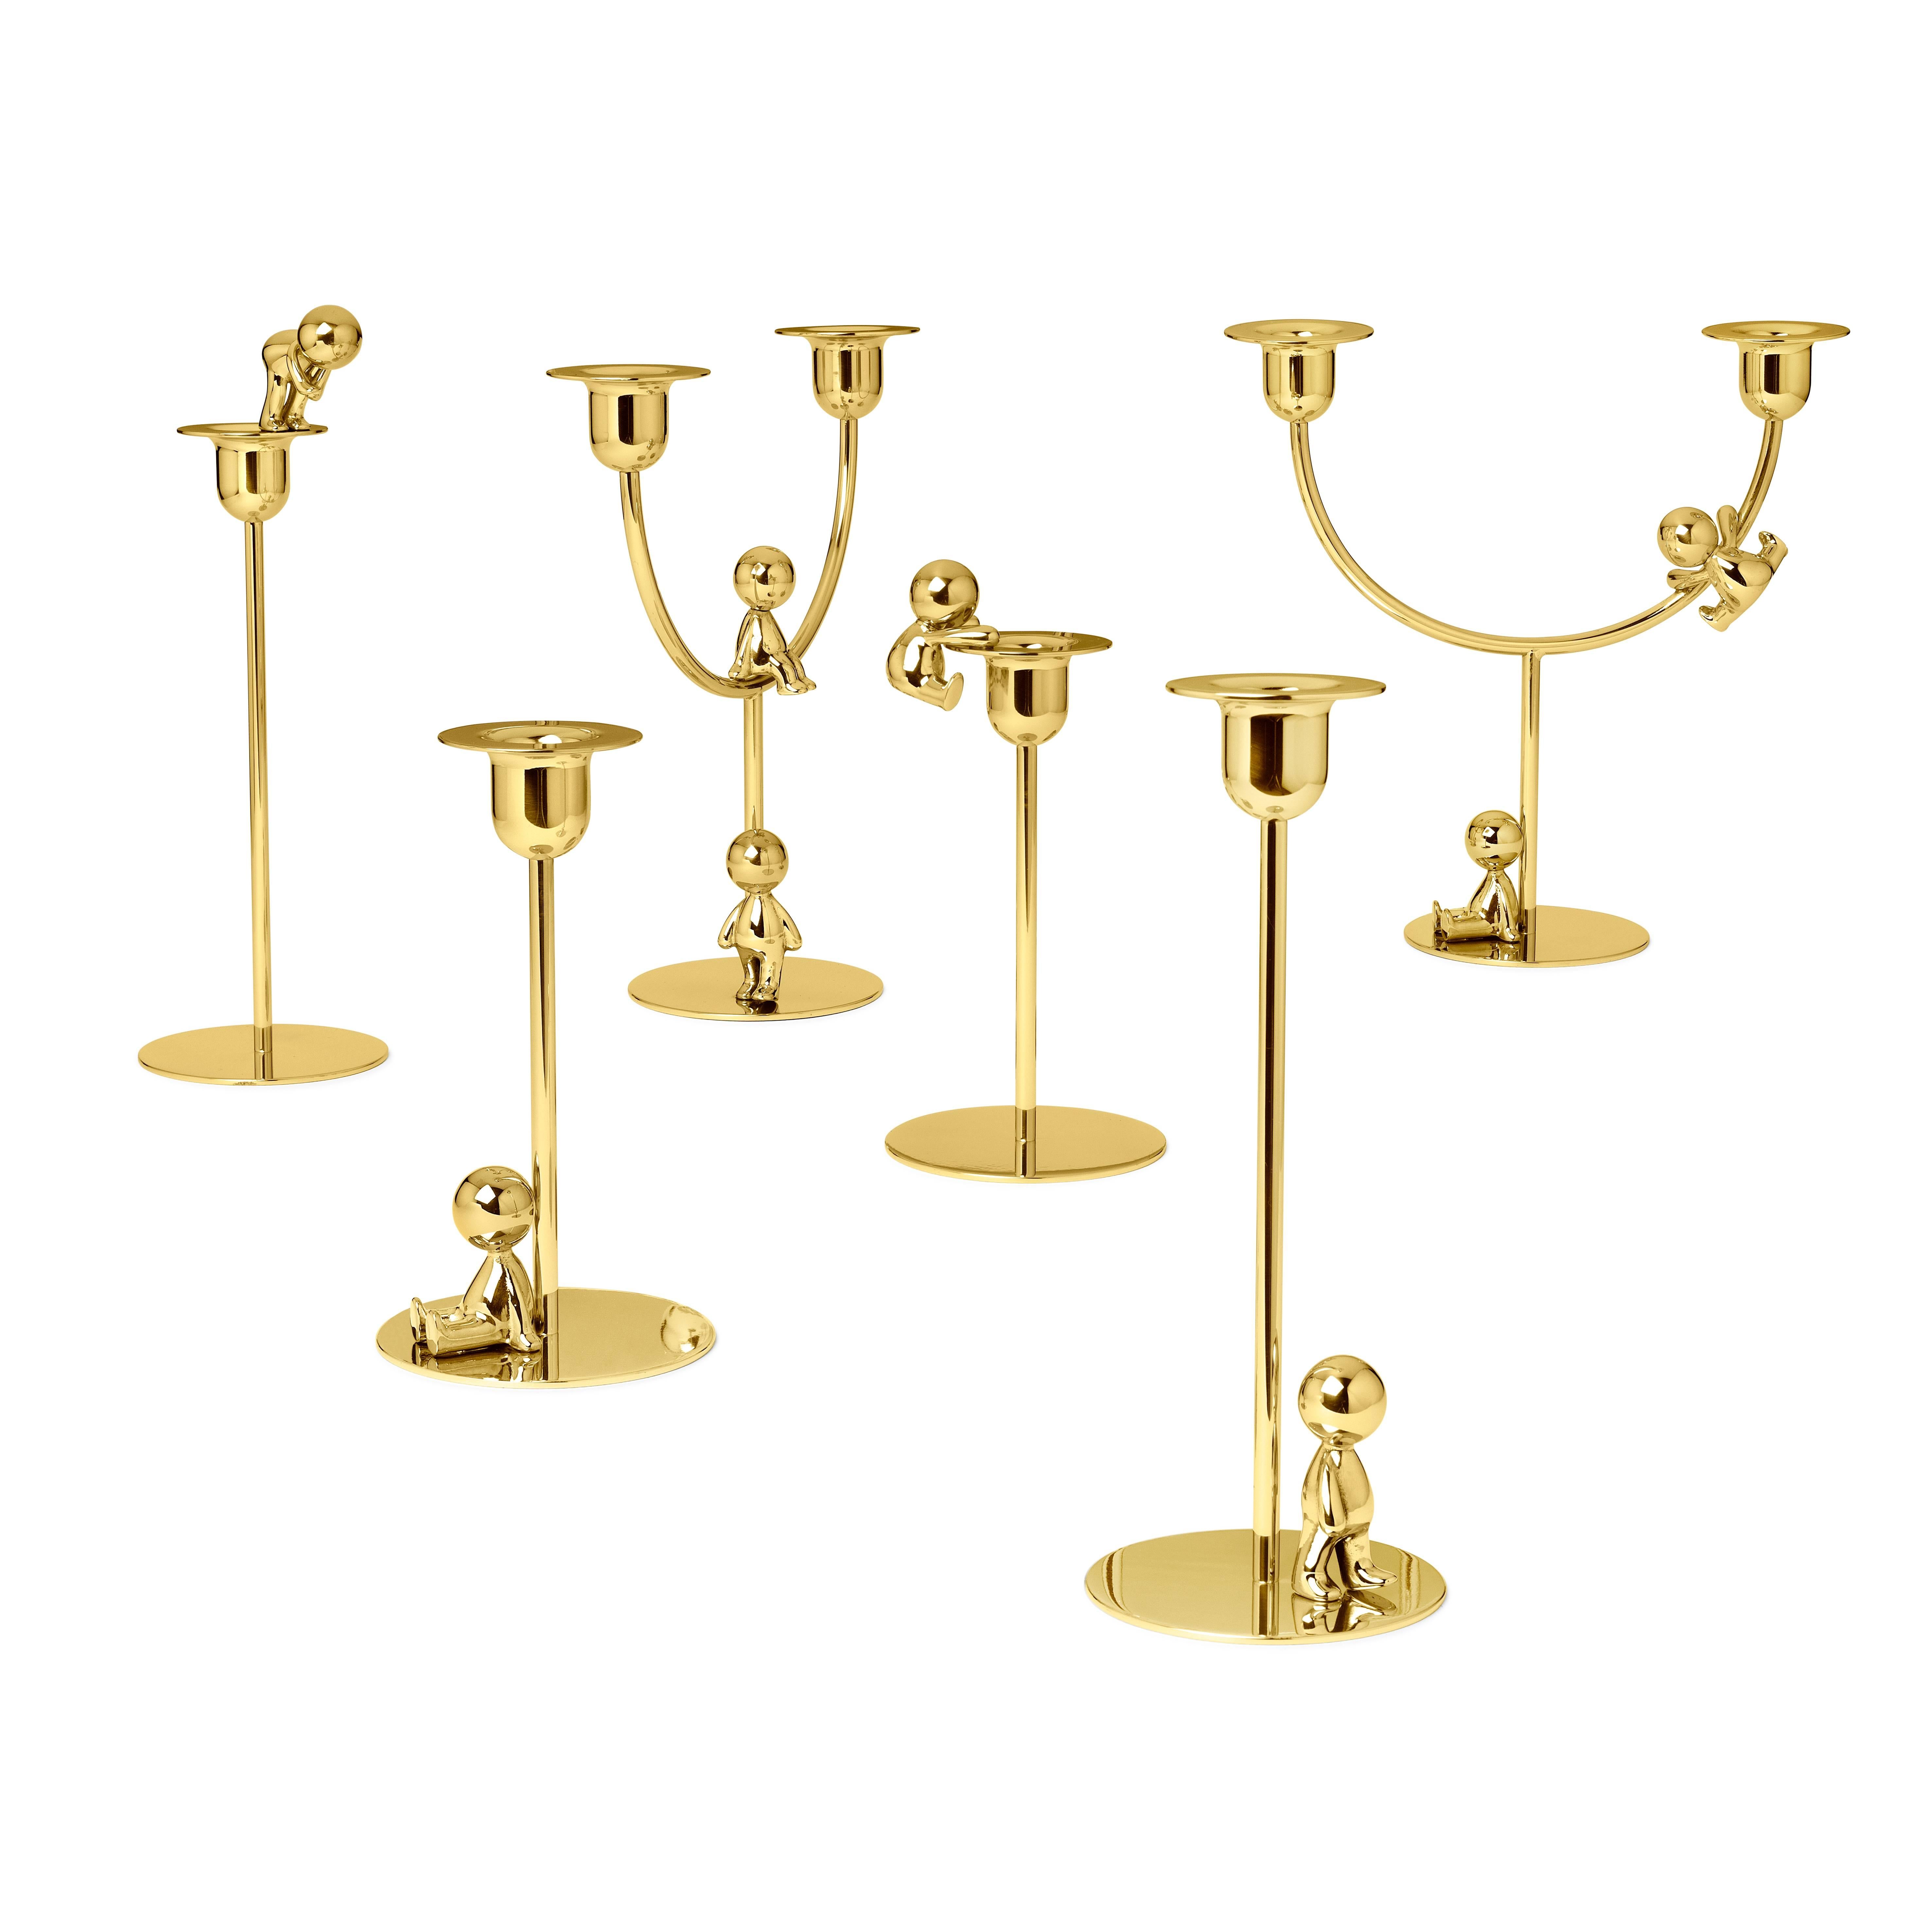 This delightful polished brass tall candlestick is a creative accent for any modern interior. Ideal for displaying tall dinner candles, the minimalist design is marked by a bulbed bobeche with a wide rim supported by a short column and a flat base.